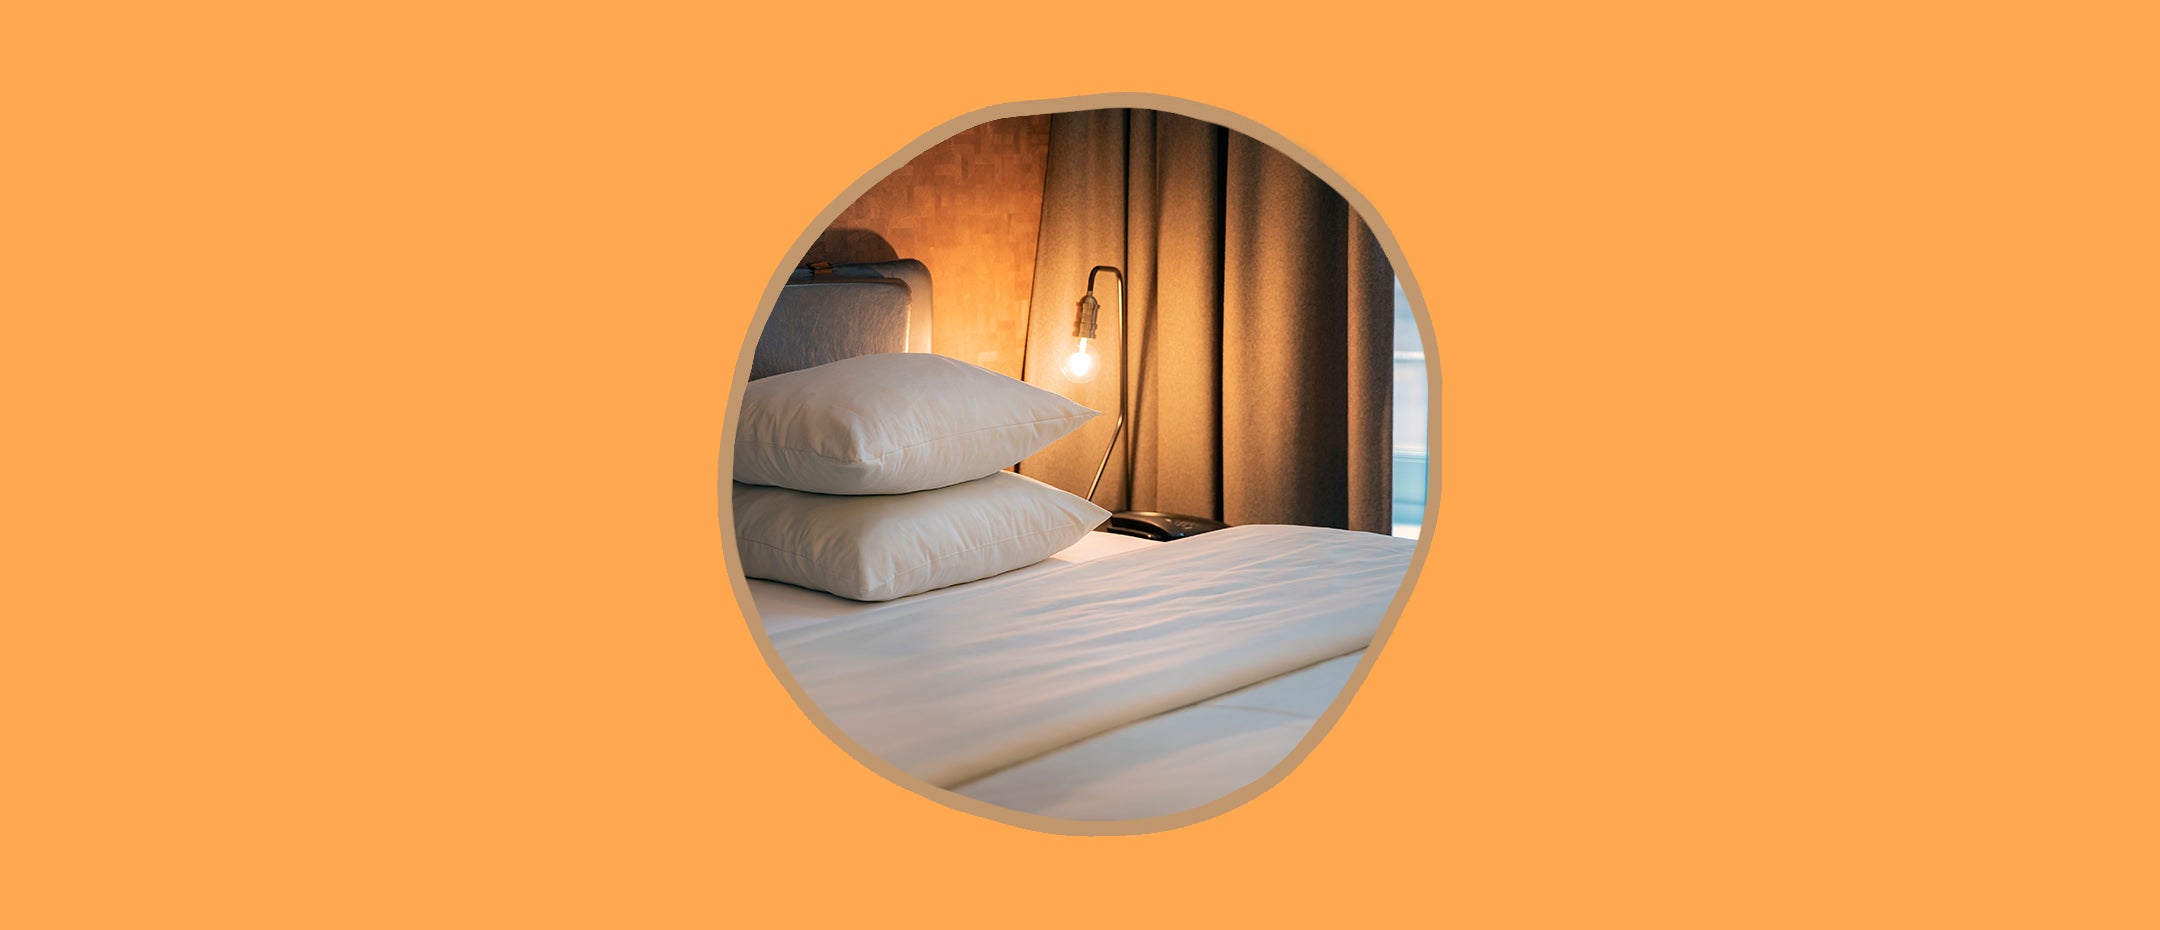 Hotel mattress, pillows, bedding and more questions answered!